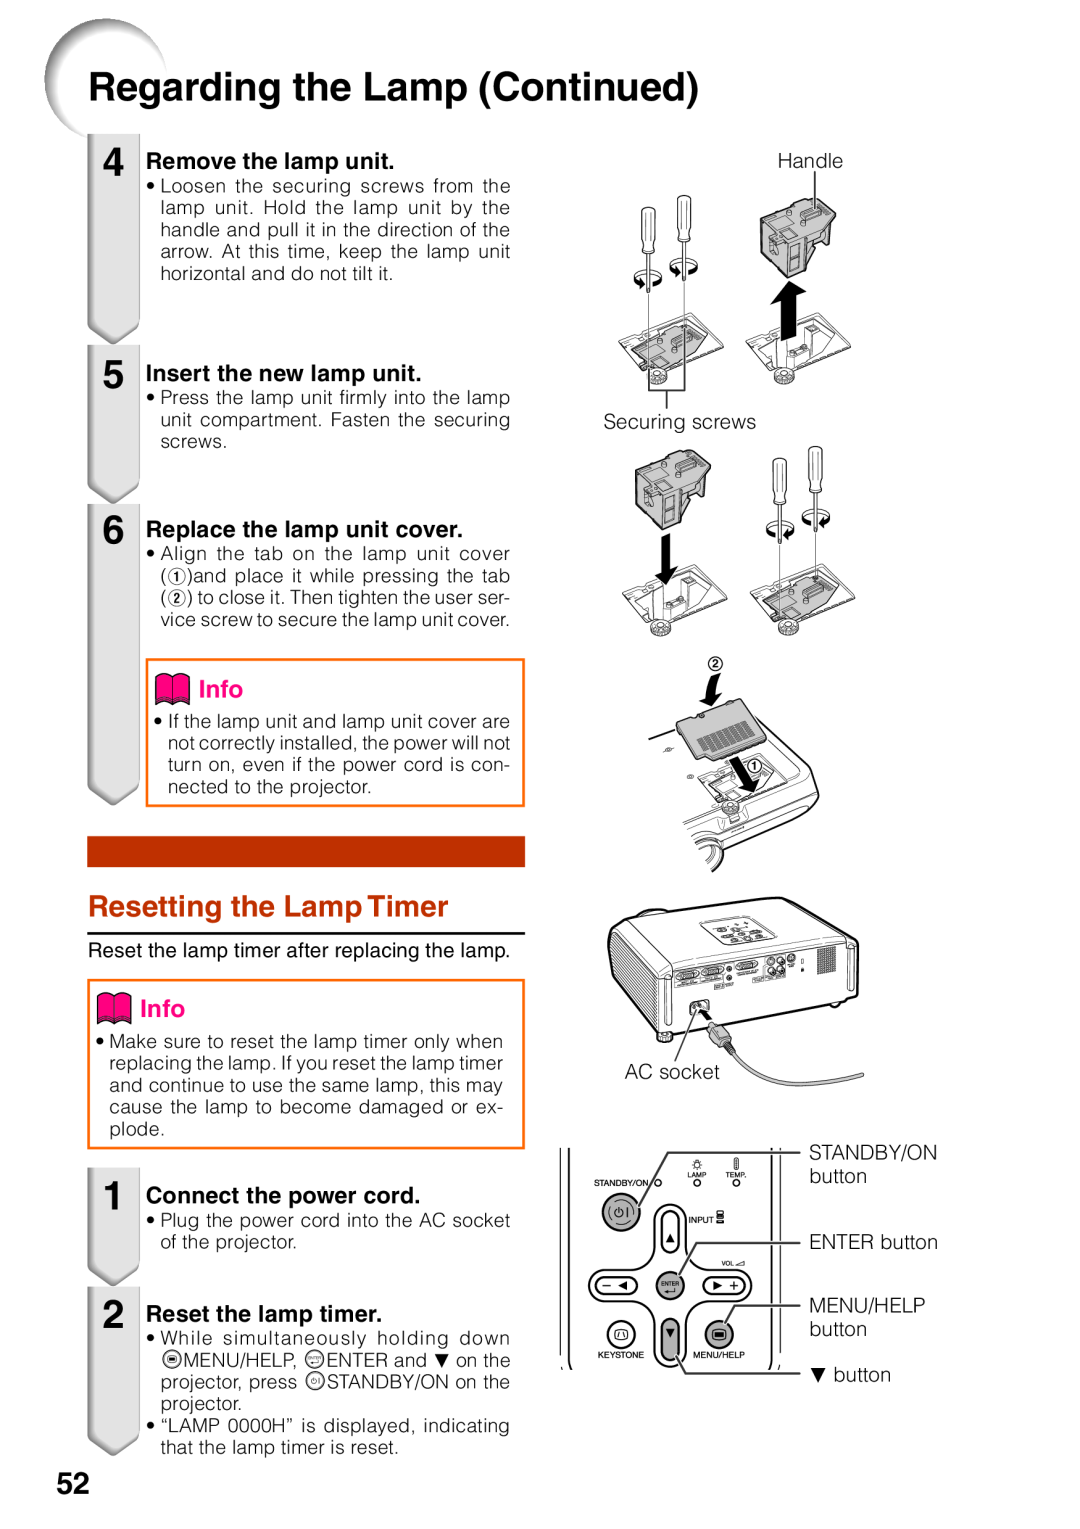 Sharp XR-10X Regarding the Lamp Continued, Resetting the Lamp Timer, Info, Remove the lamp unit, Insert the new lamp unit 